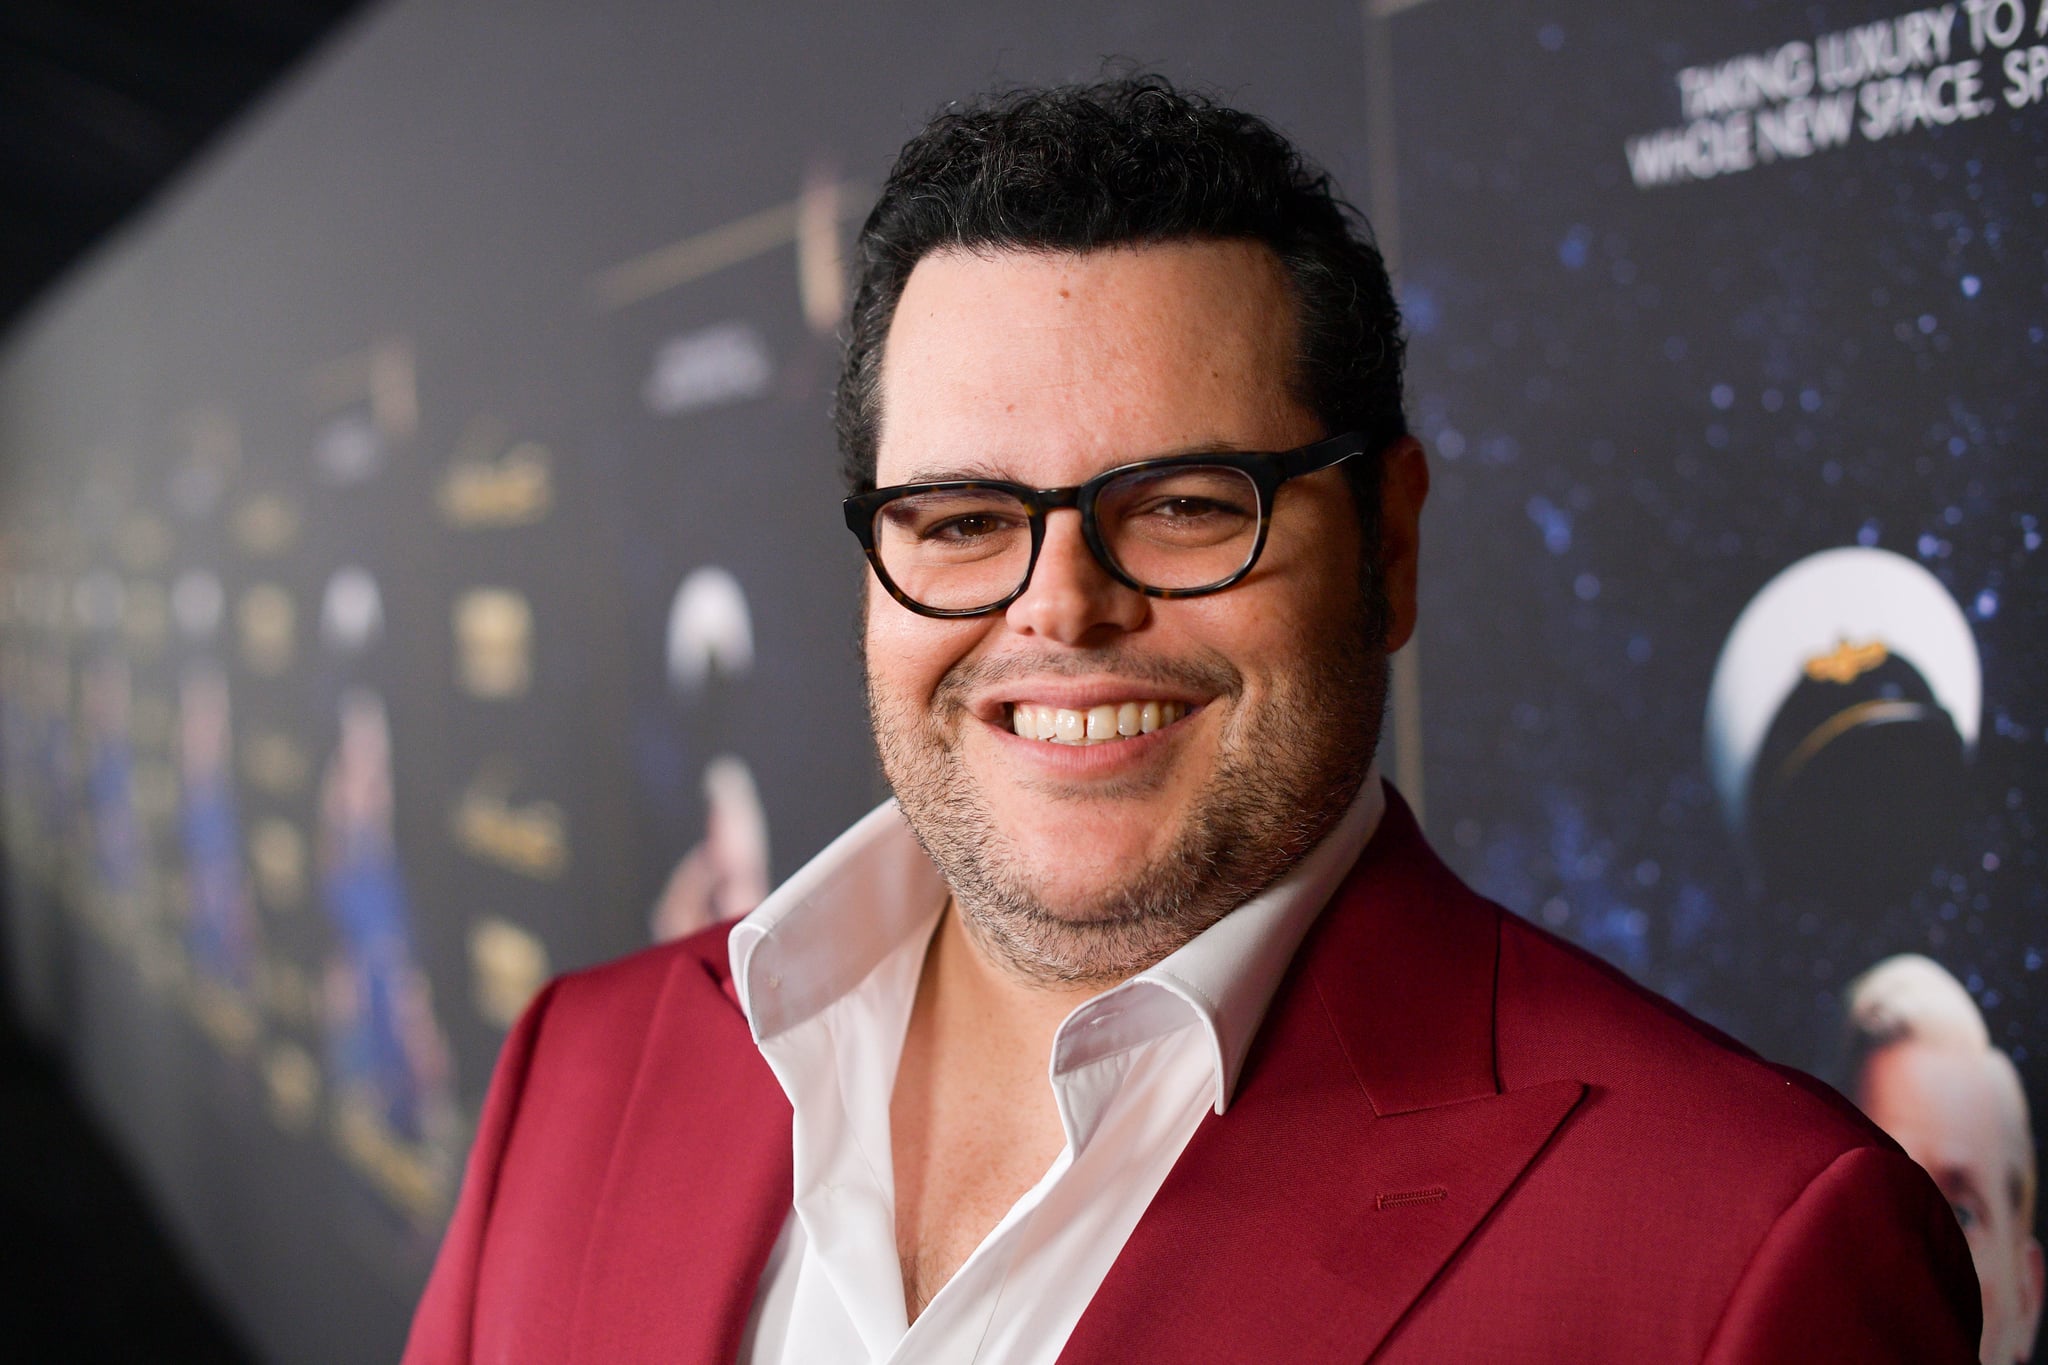 LOS ANGELES, CALIFORNIA - JANUARY 14: Josh Gad attends the premiere of HBO's 